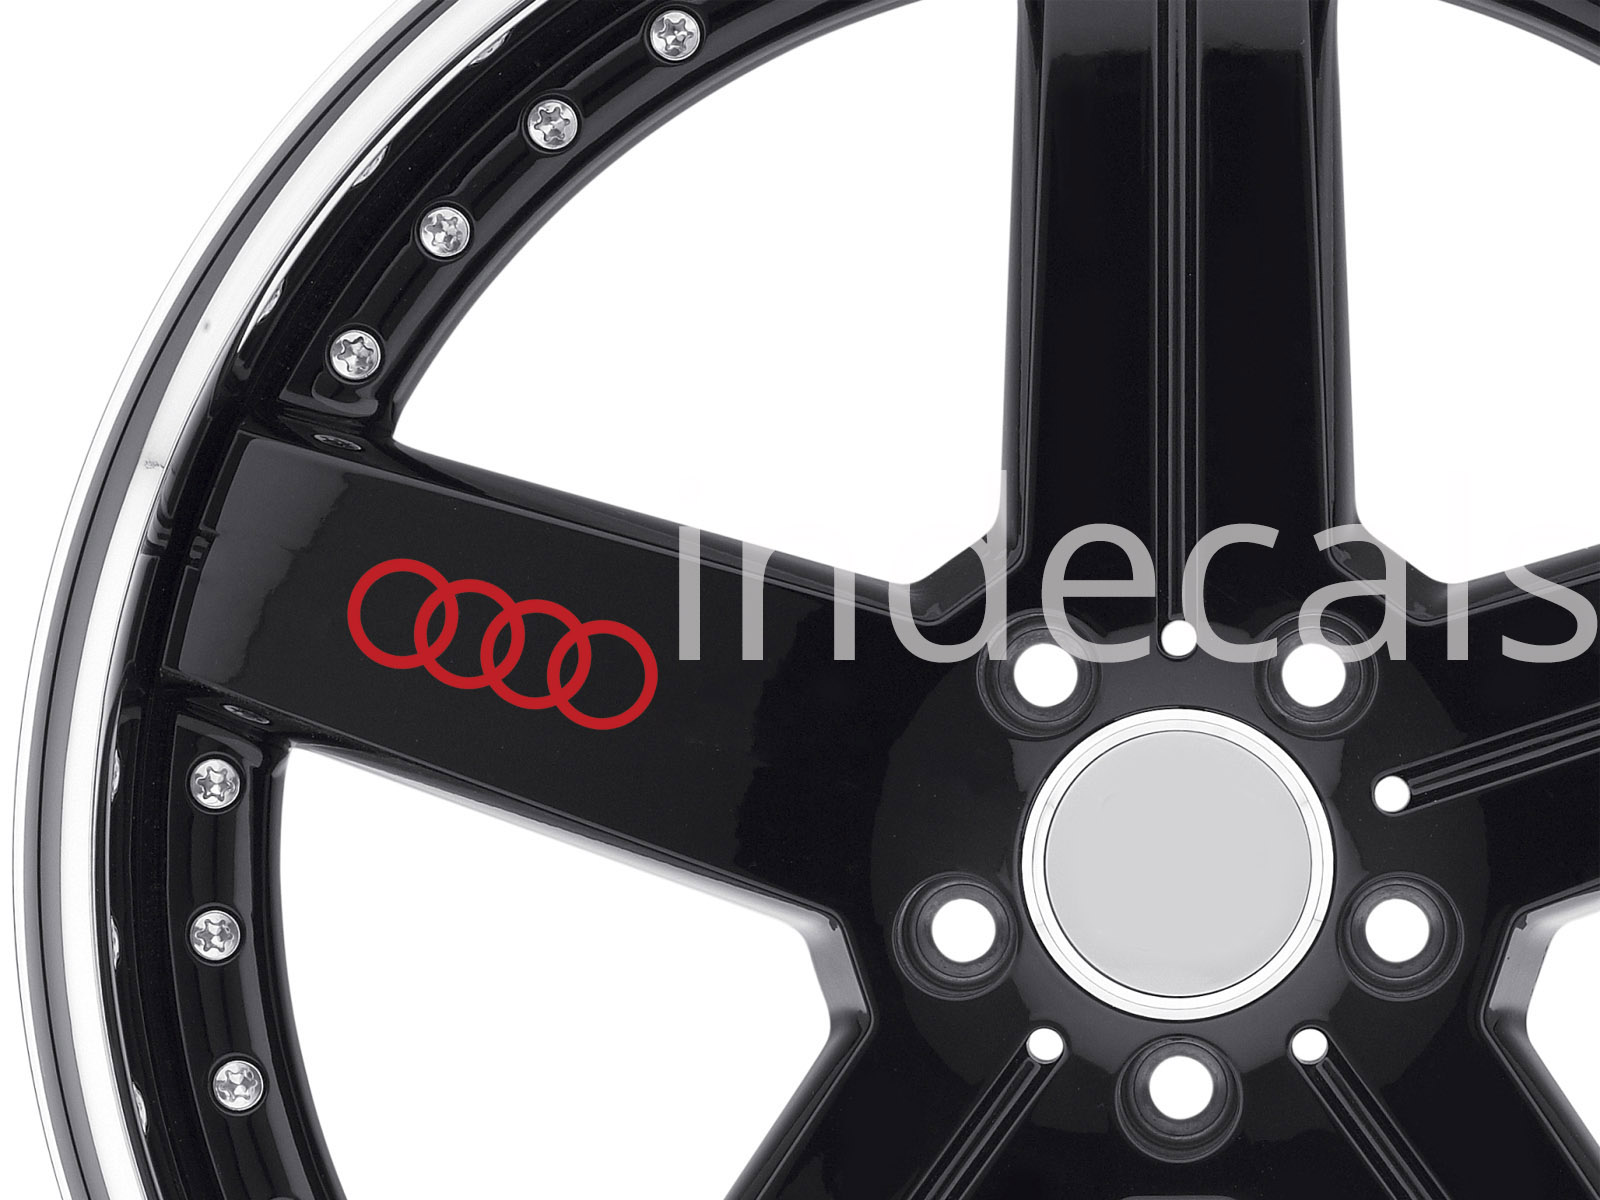 6 x Audi Rings Stickers for Wheels - Red